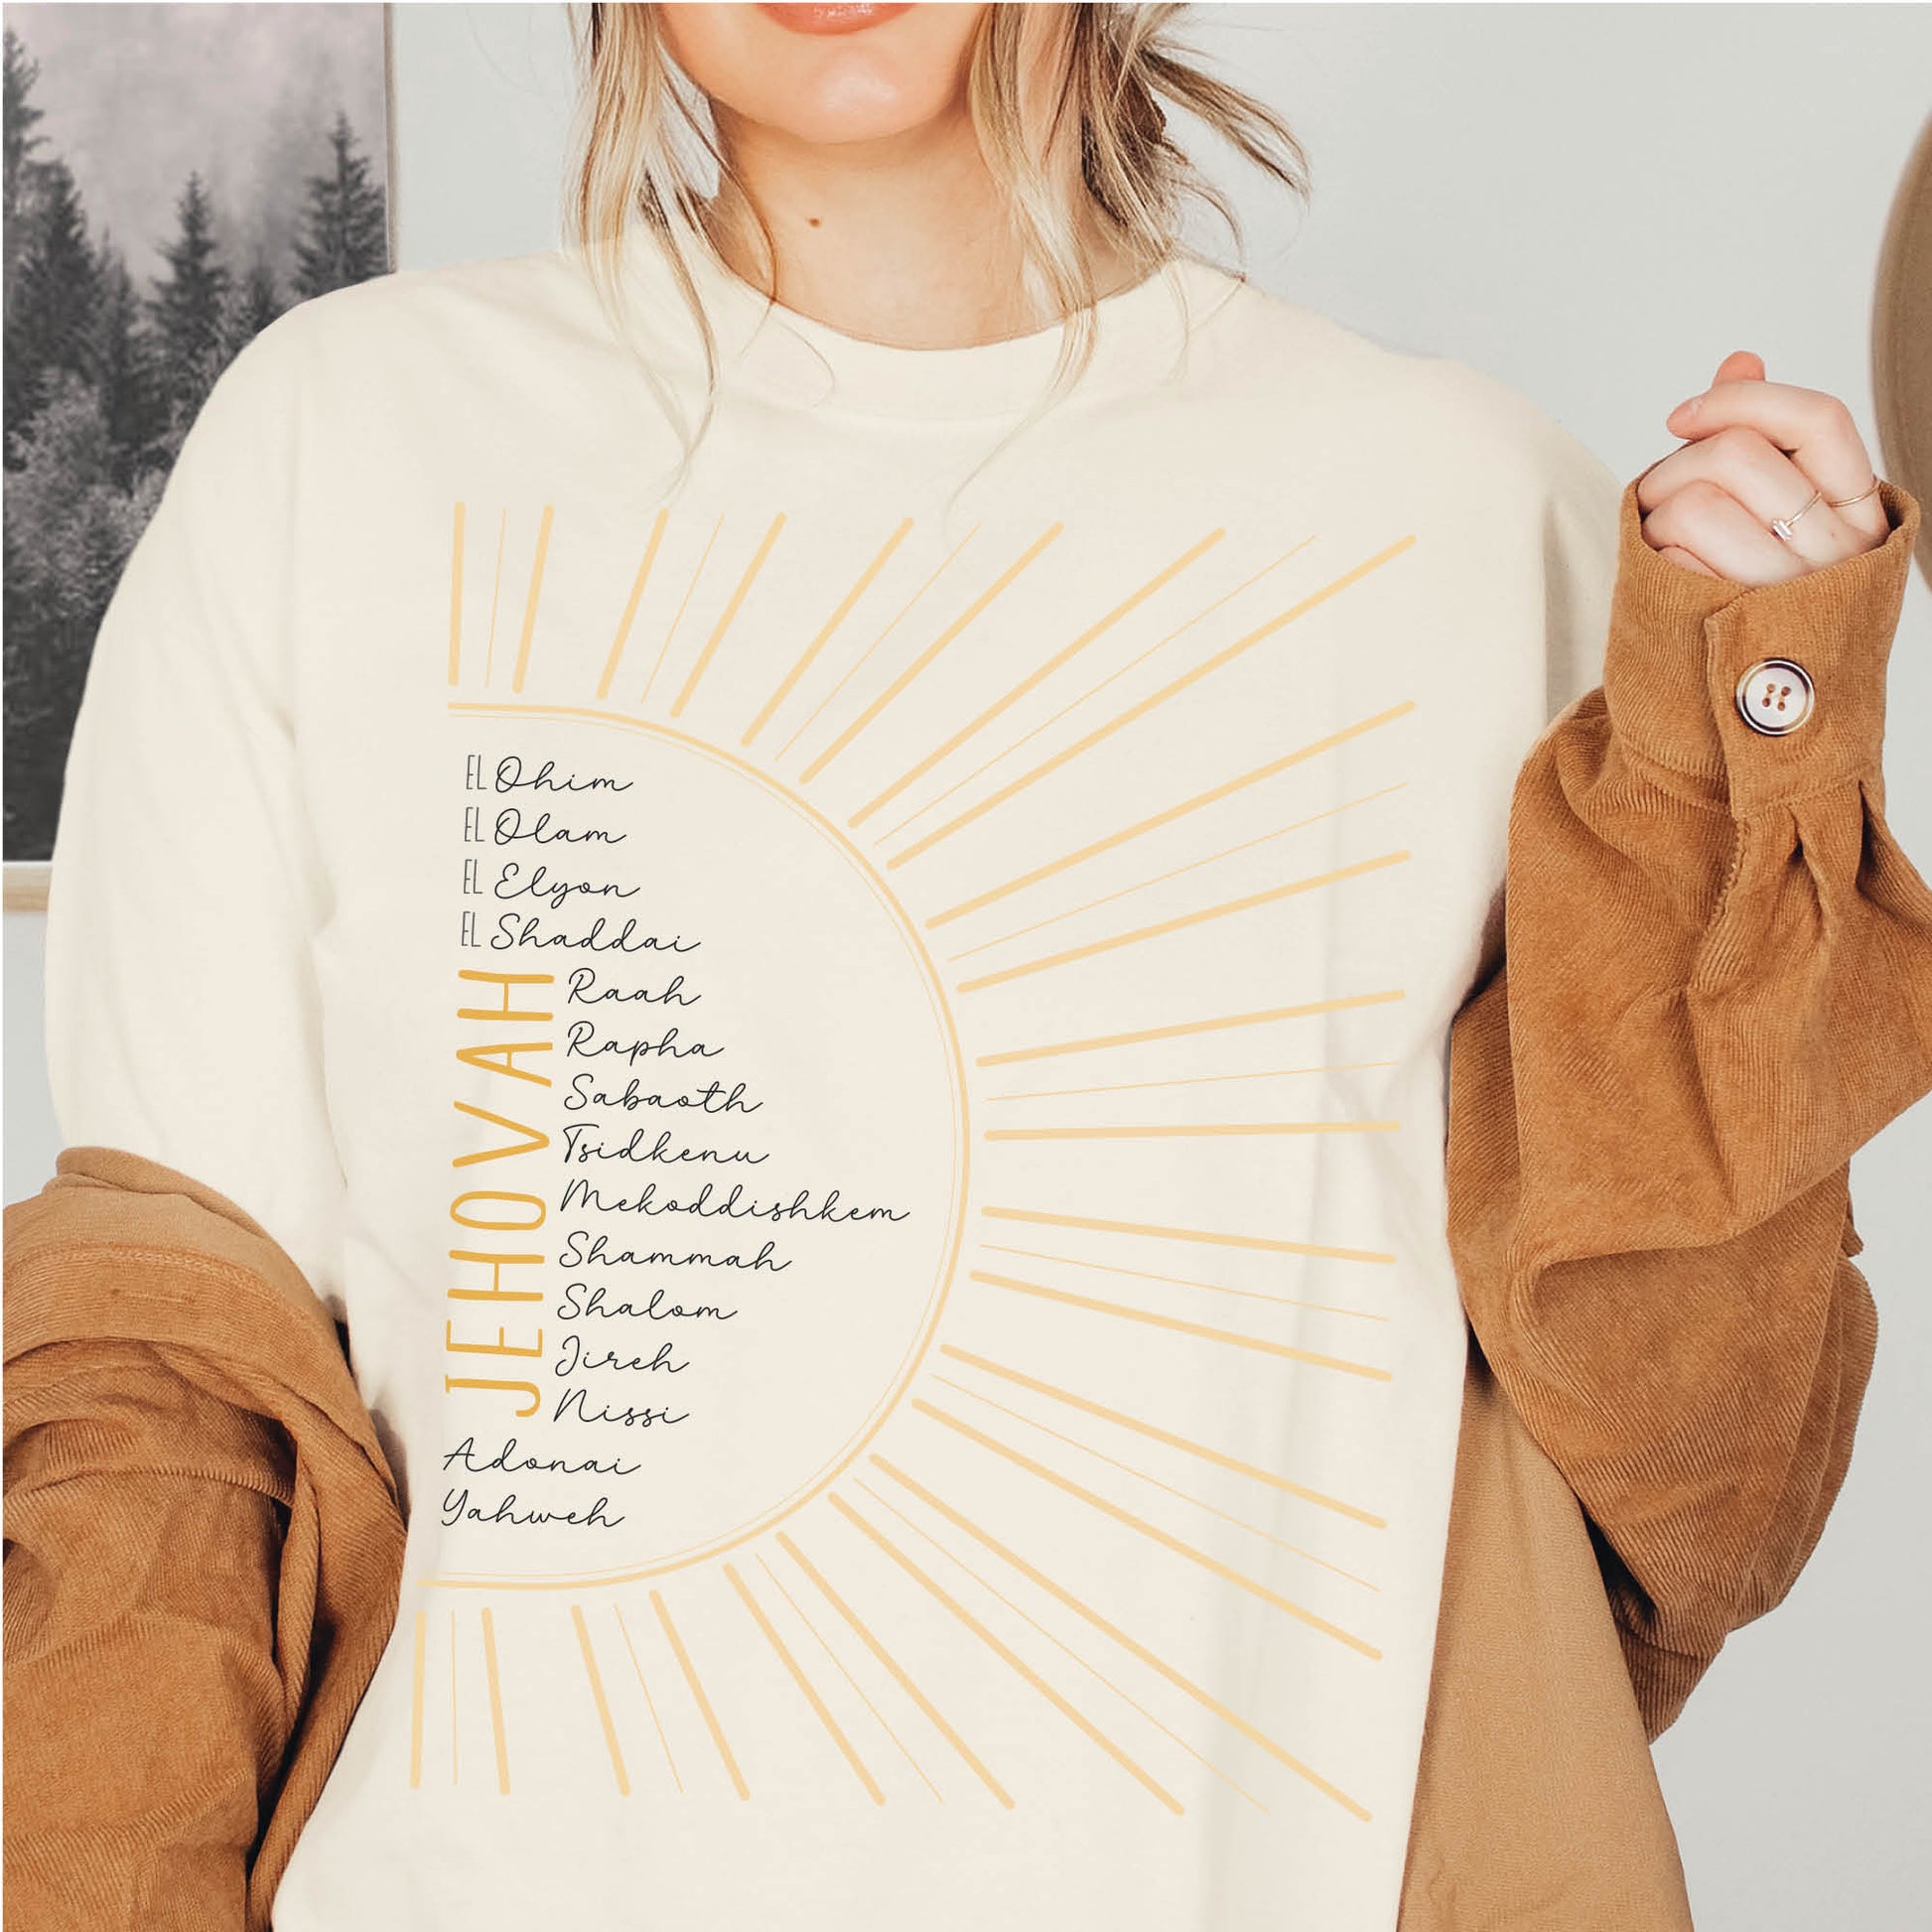 Boho woman wearing The Names of God Hebrew Christian Old Testament Bible List Sunshine T-Shirt, printed in gold and black on soft cream Bella-Canvas 3001 t-shirt, women's soft unisex fit regular and plus size tee